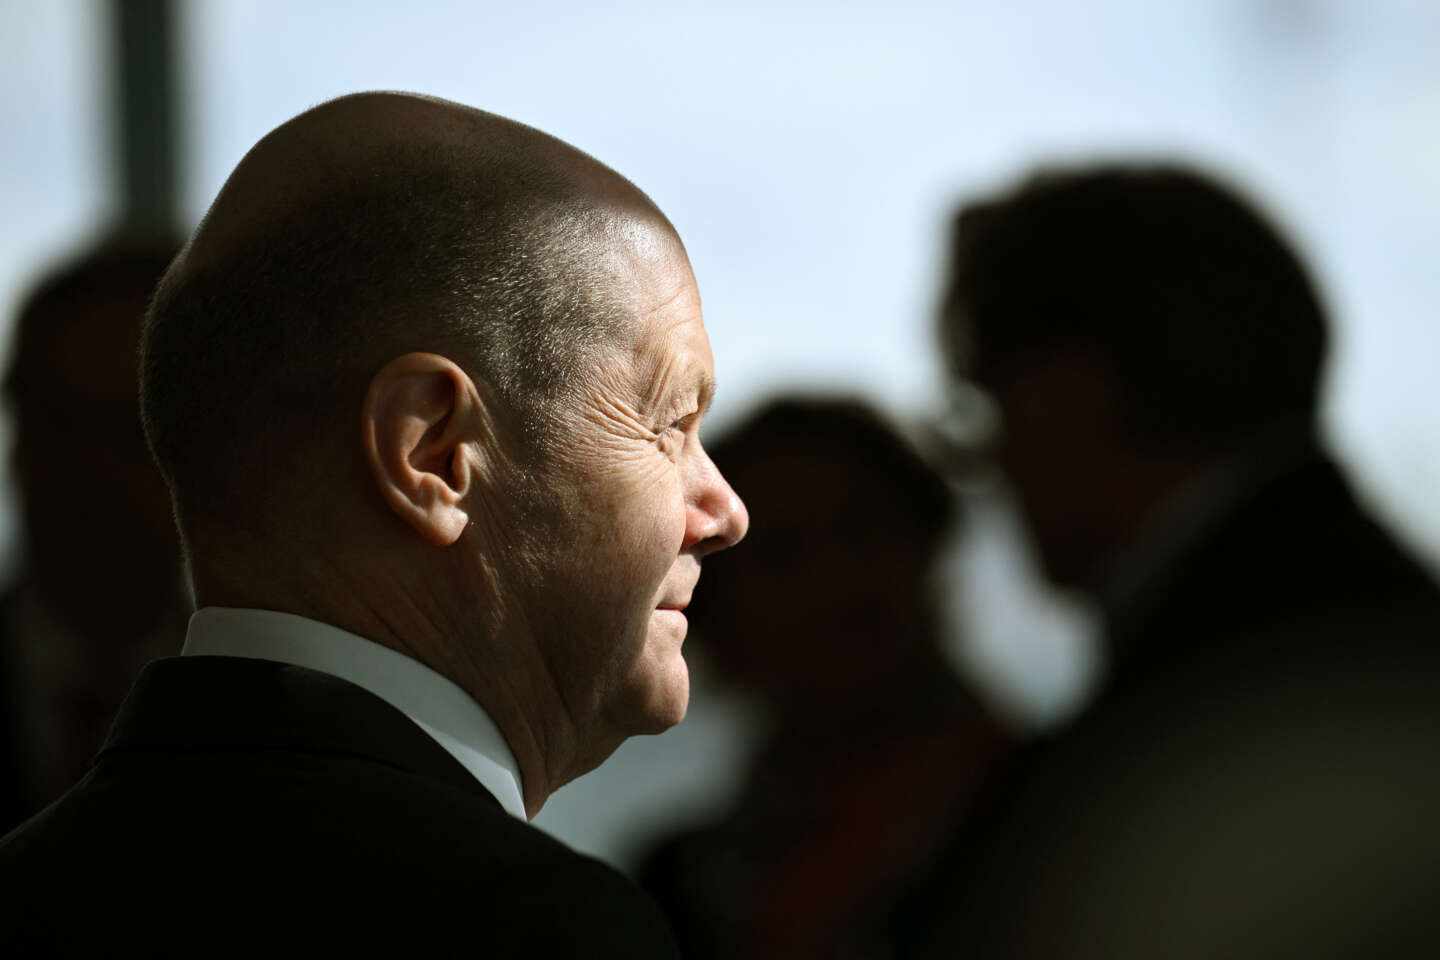 Armaments, the other aspect of the “change of era” announced by Chancellor Olaf Scholz